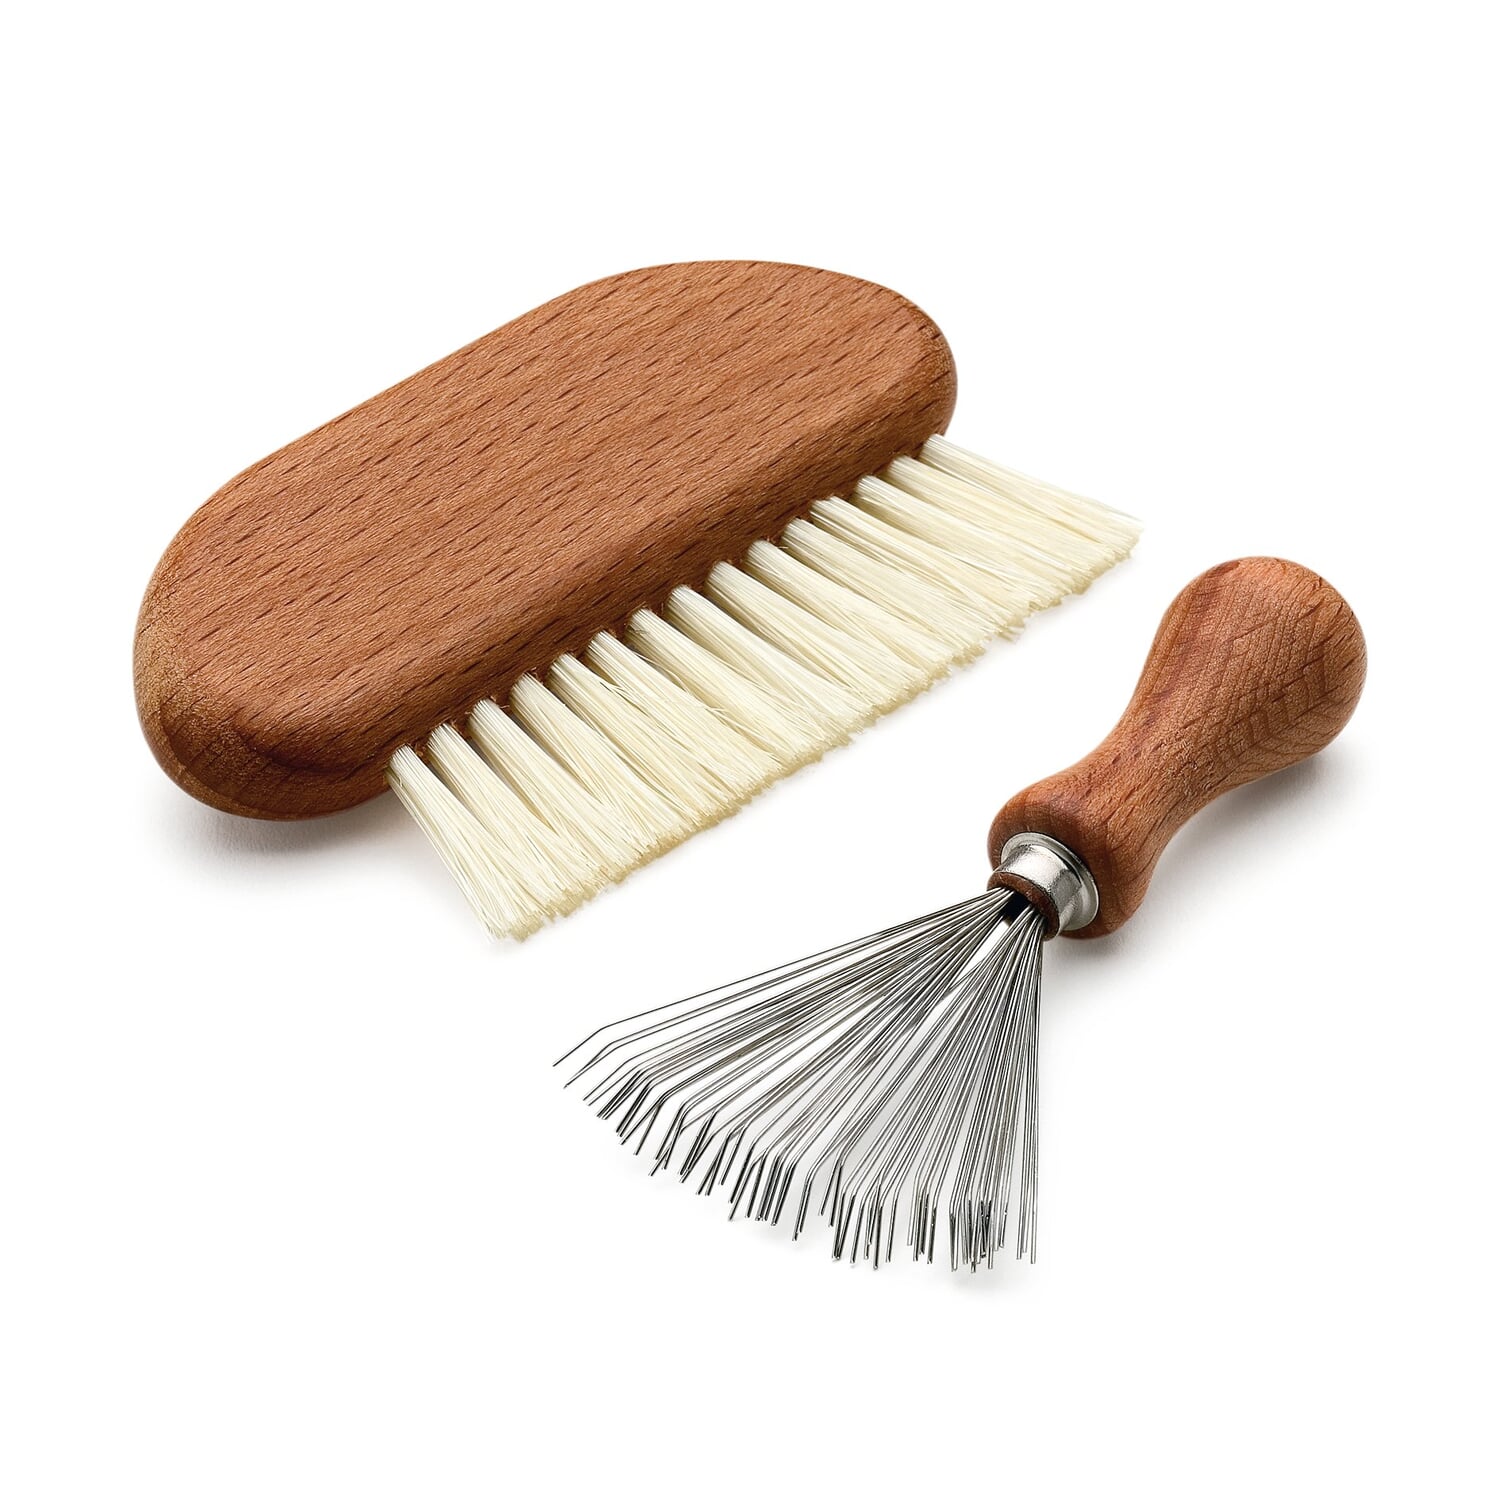 Beech Wood Stylish Cleaning Tools